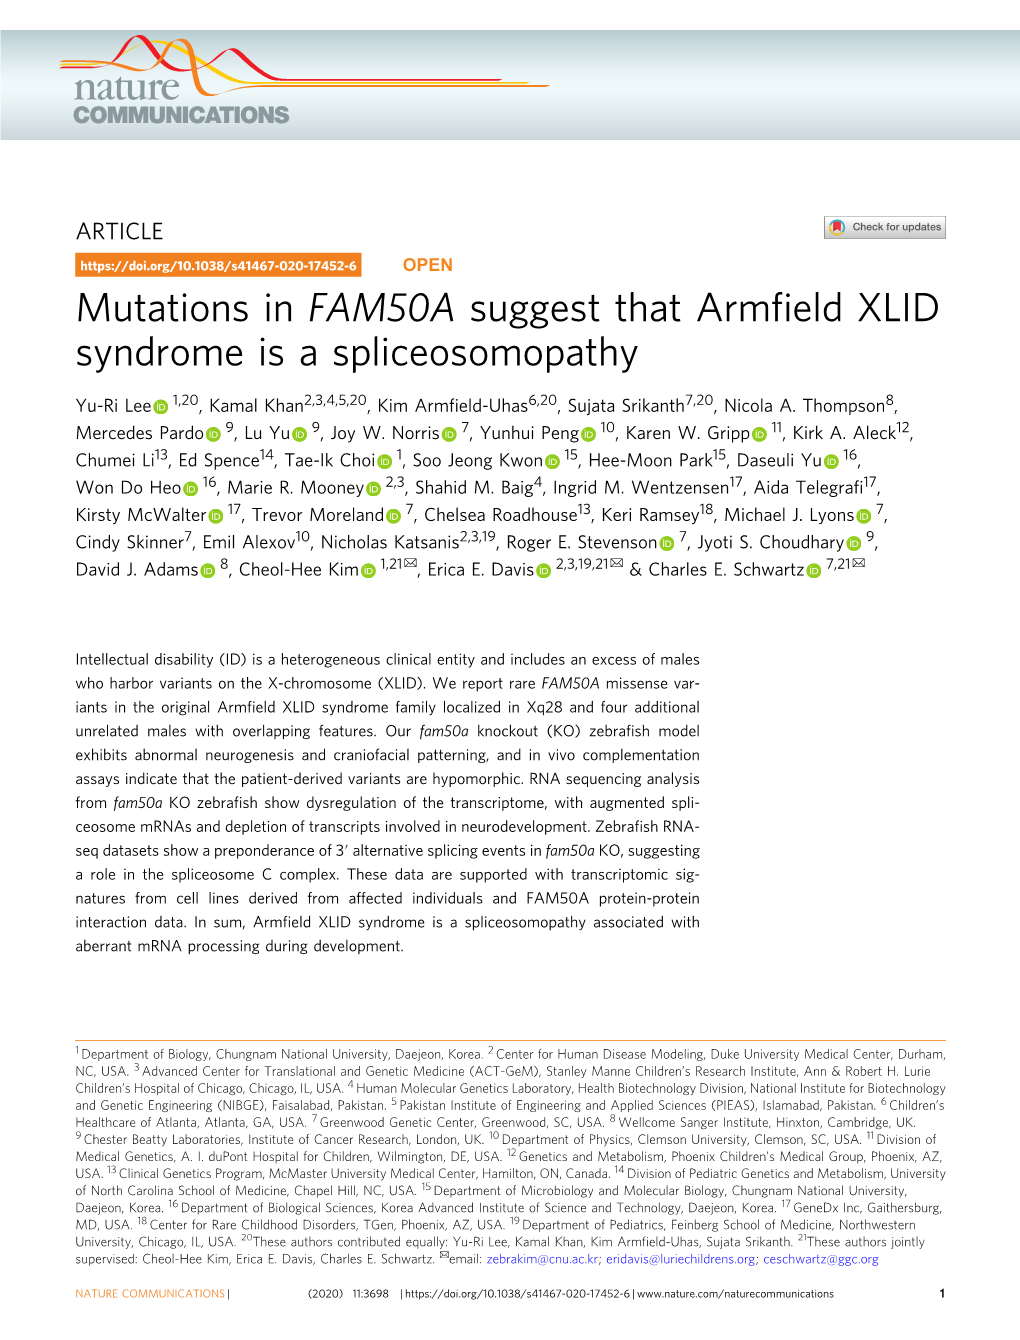 Mutations in FAM50A Suggest That Armfield XLID Syndrome Is